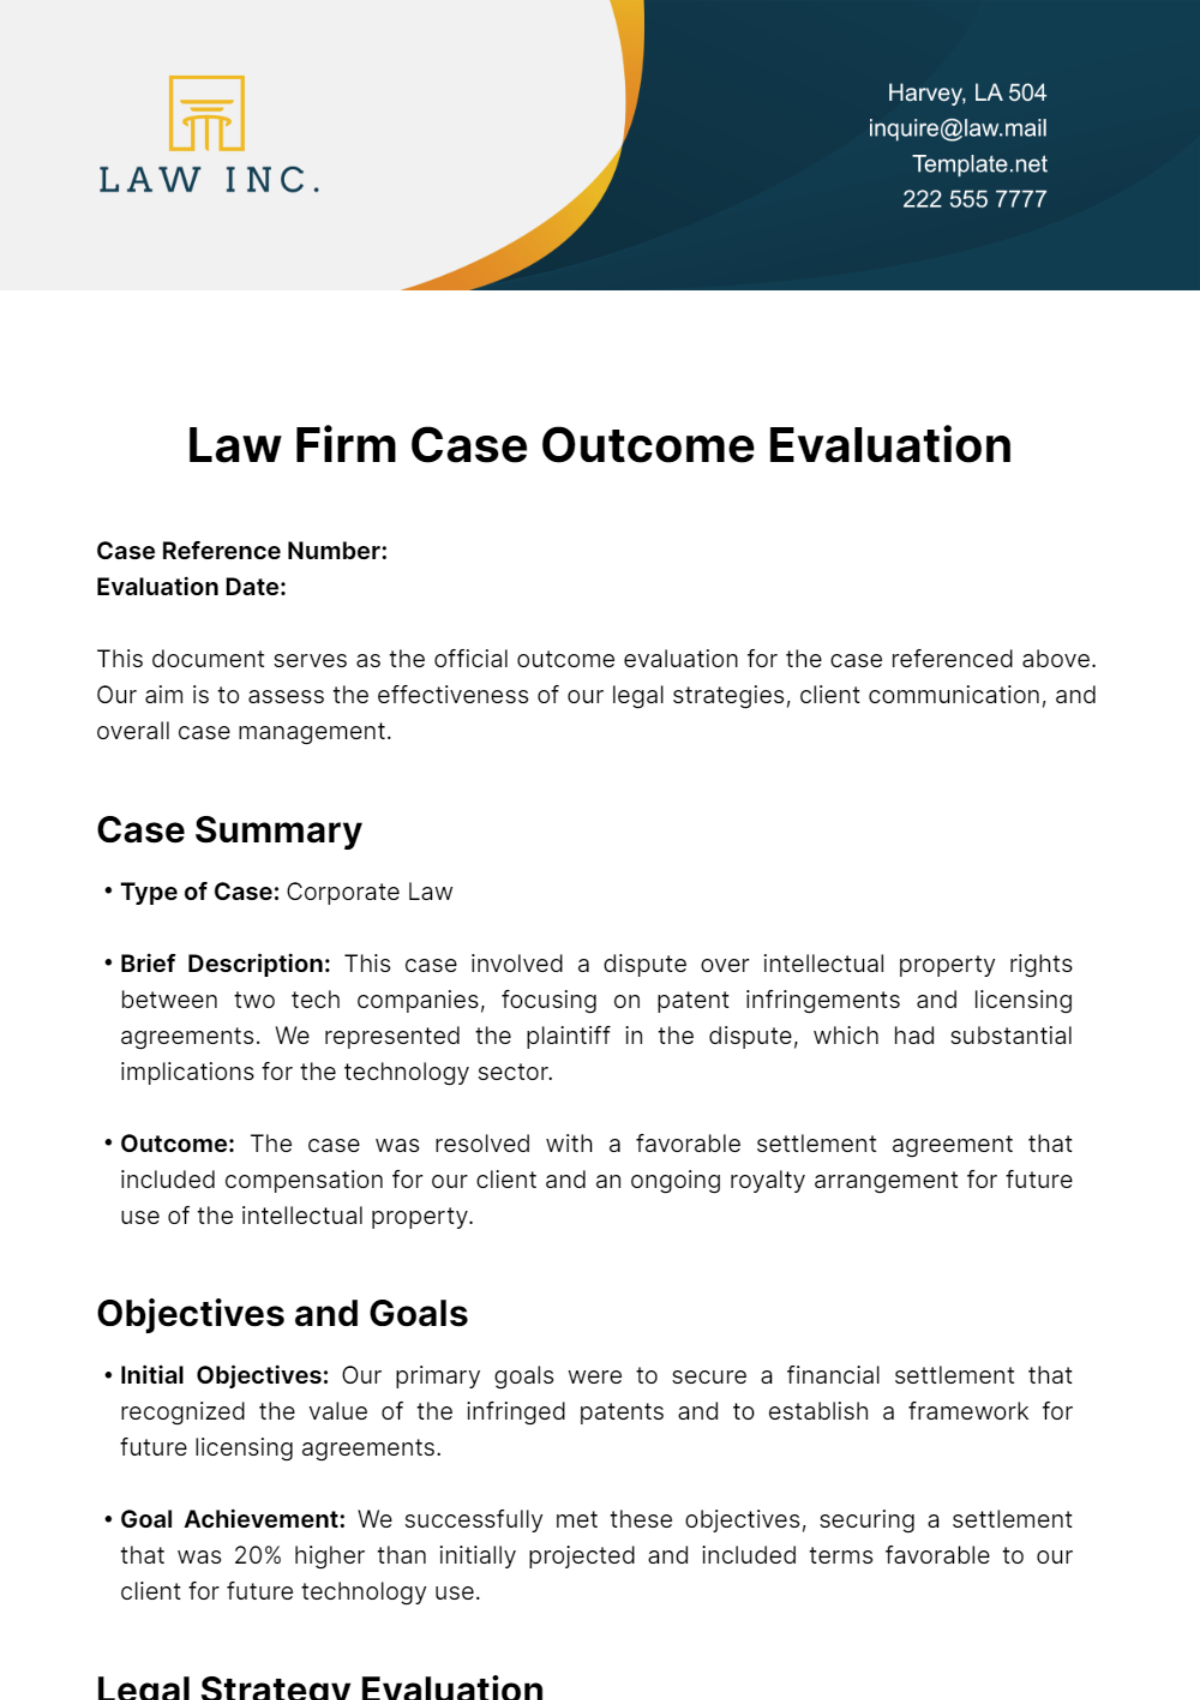 Law Firm Case Outcome Evaluation Template